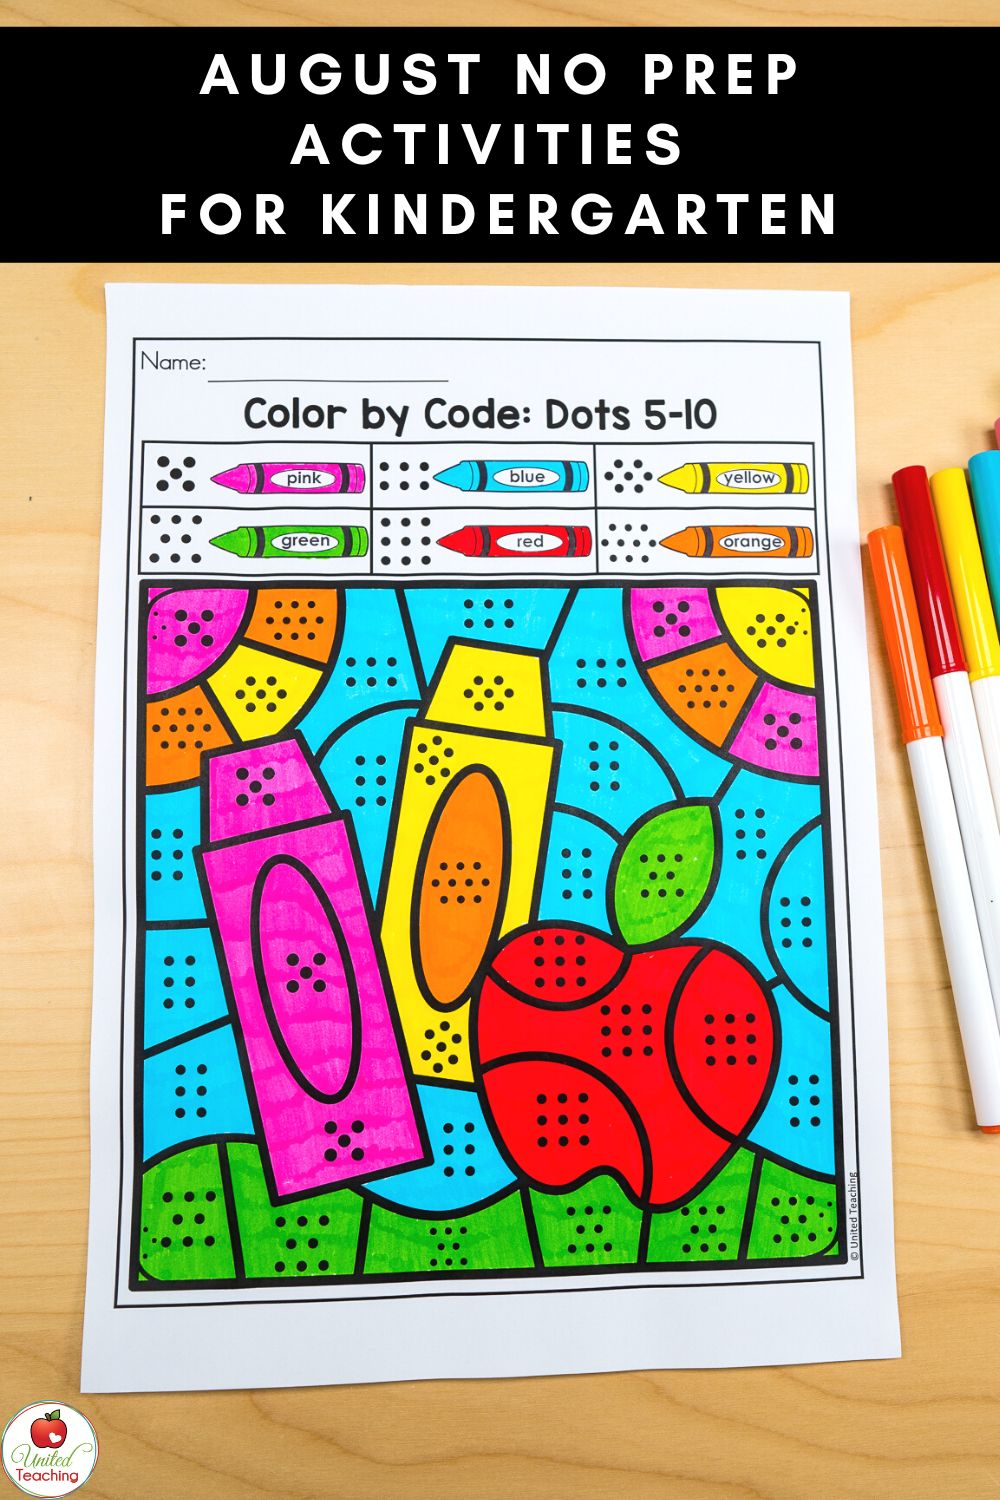 August Activities and Worksheets for Kindergarten Pin for Later Image